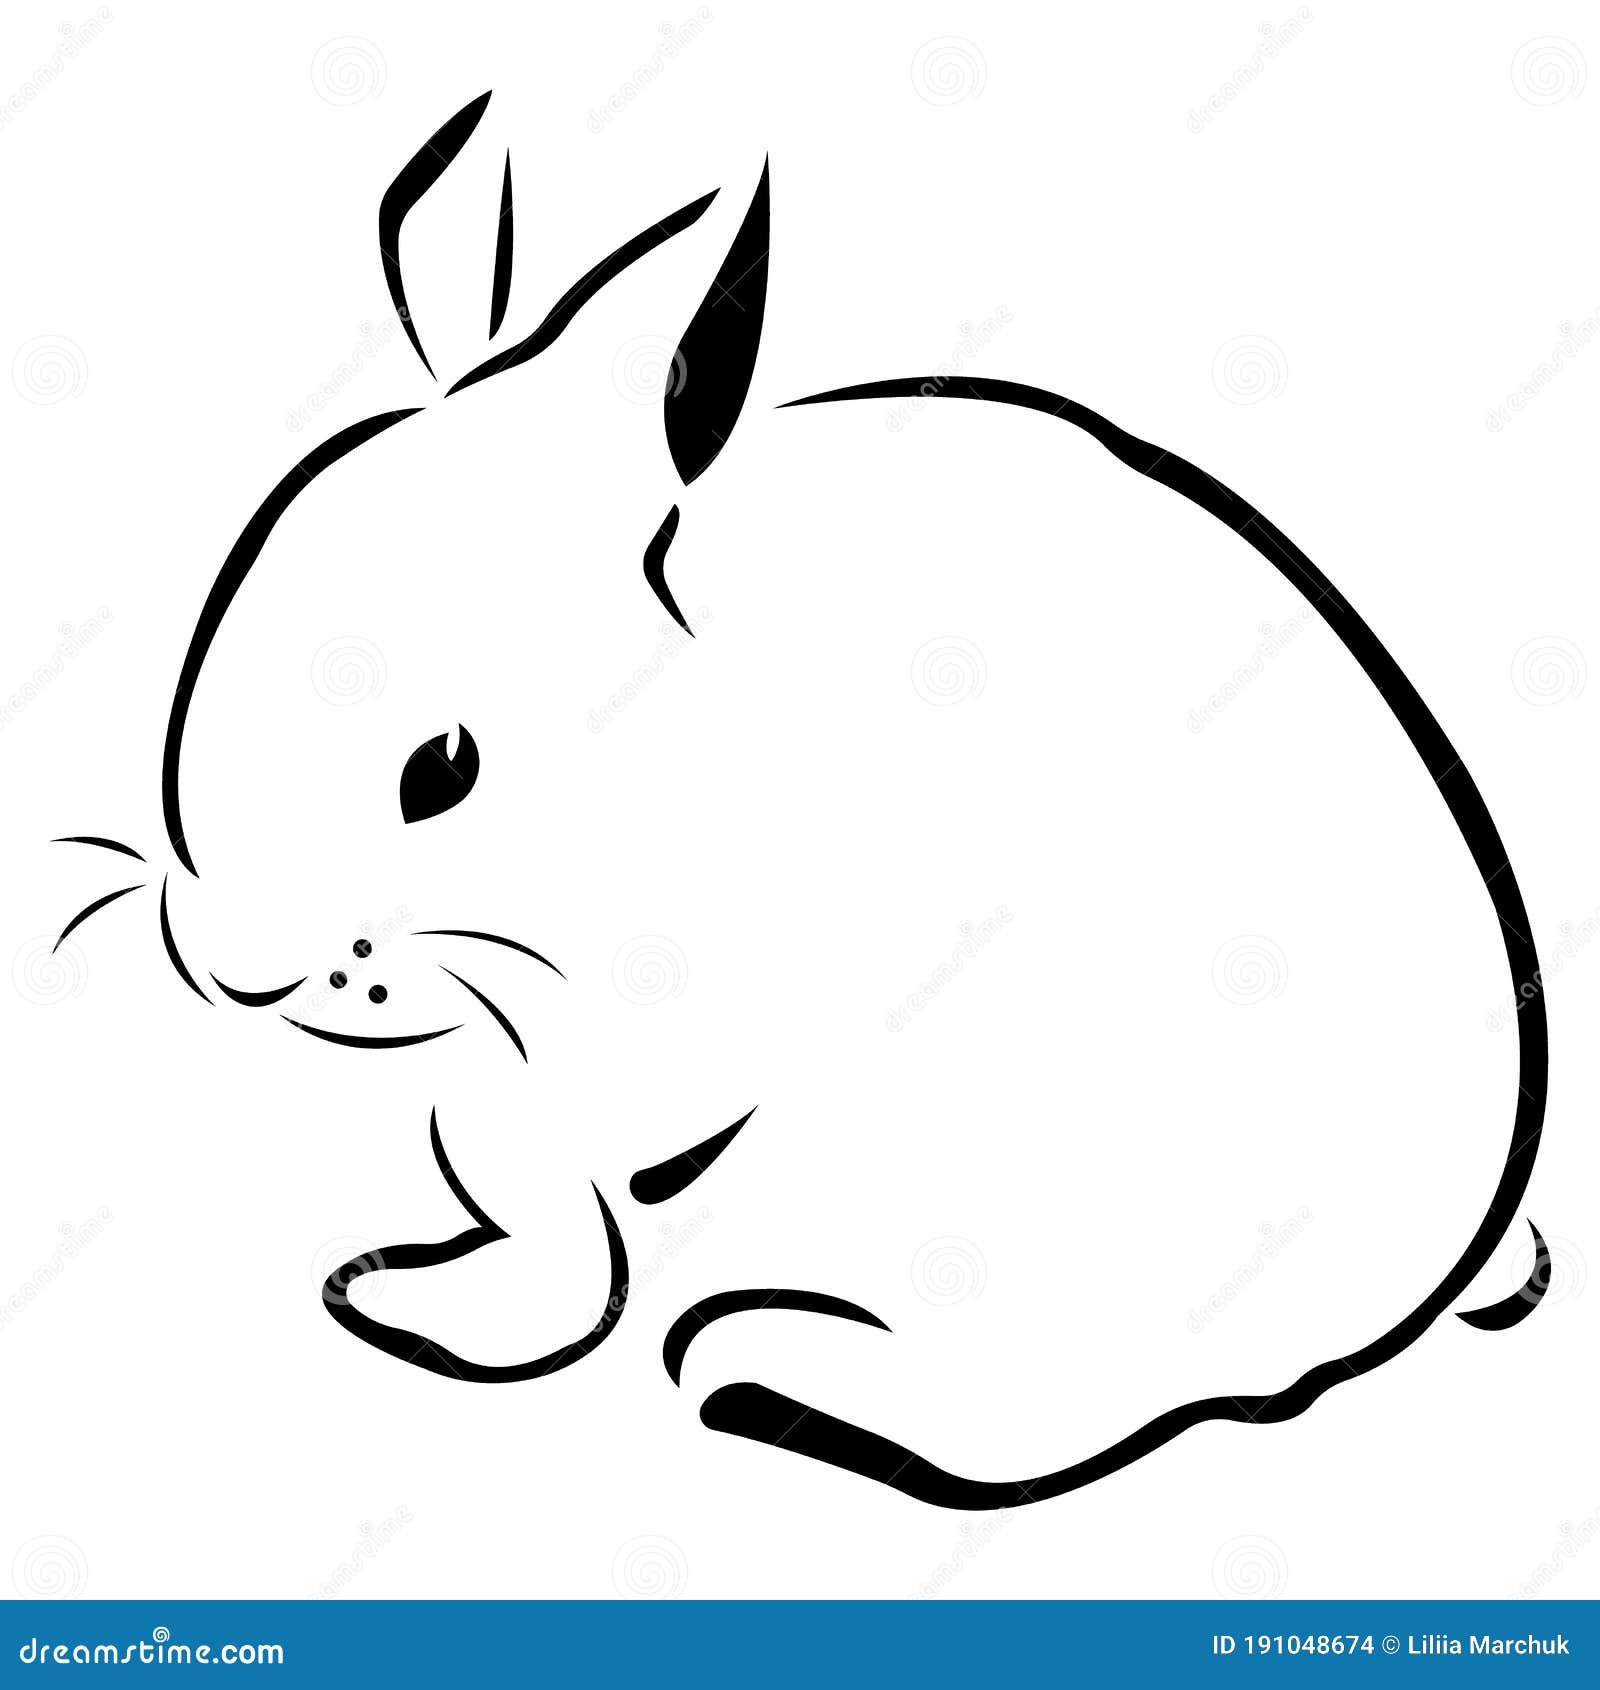 Premium Vector | Zombie rabbit outline design for flash tattoo coloring  page and doodle art